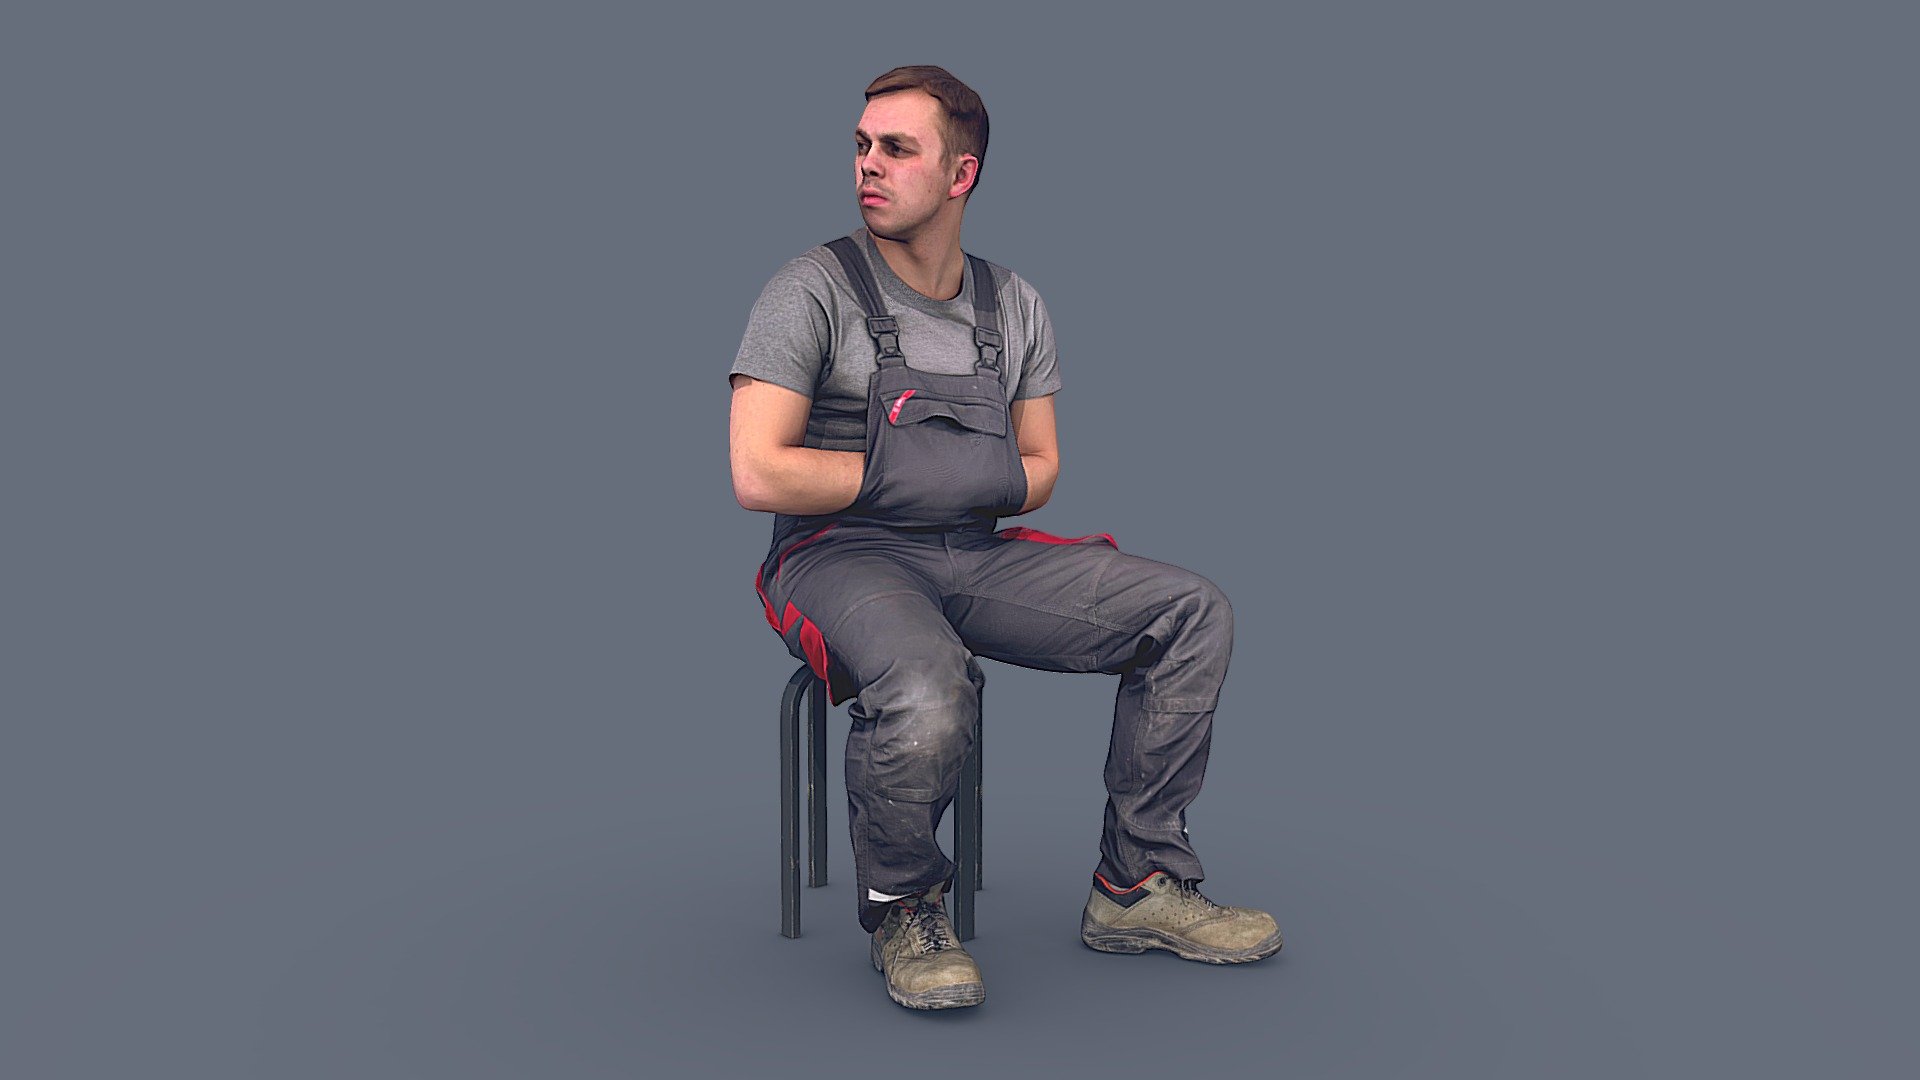 ✉️ A young strong man, a guy in overalls, sits, is on the construction site, supervises the process, his hands are in his pockets.

🦾 This model will be an excellent mid-range participant. It does not need to be very close and try to see the details, it reveals and demonstrates its texture as much as possible in case of a certain distance from the foreground.

⚙️ Photorealistic Construction Worker Character 3d model ready for Virtual Reality (VR), Augmented Reality (AR), games and other real-time apps. 50 000 polygons per model. Suitable for the architectural visualization and another graphical projects 3d model